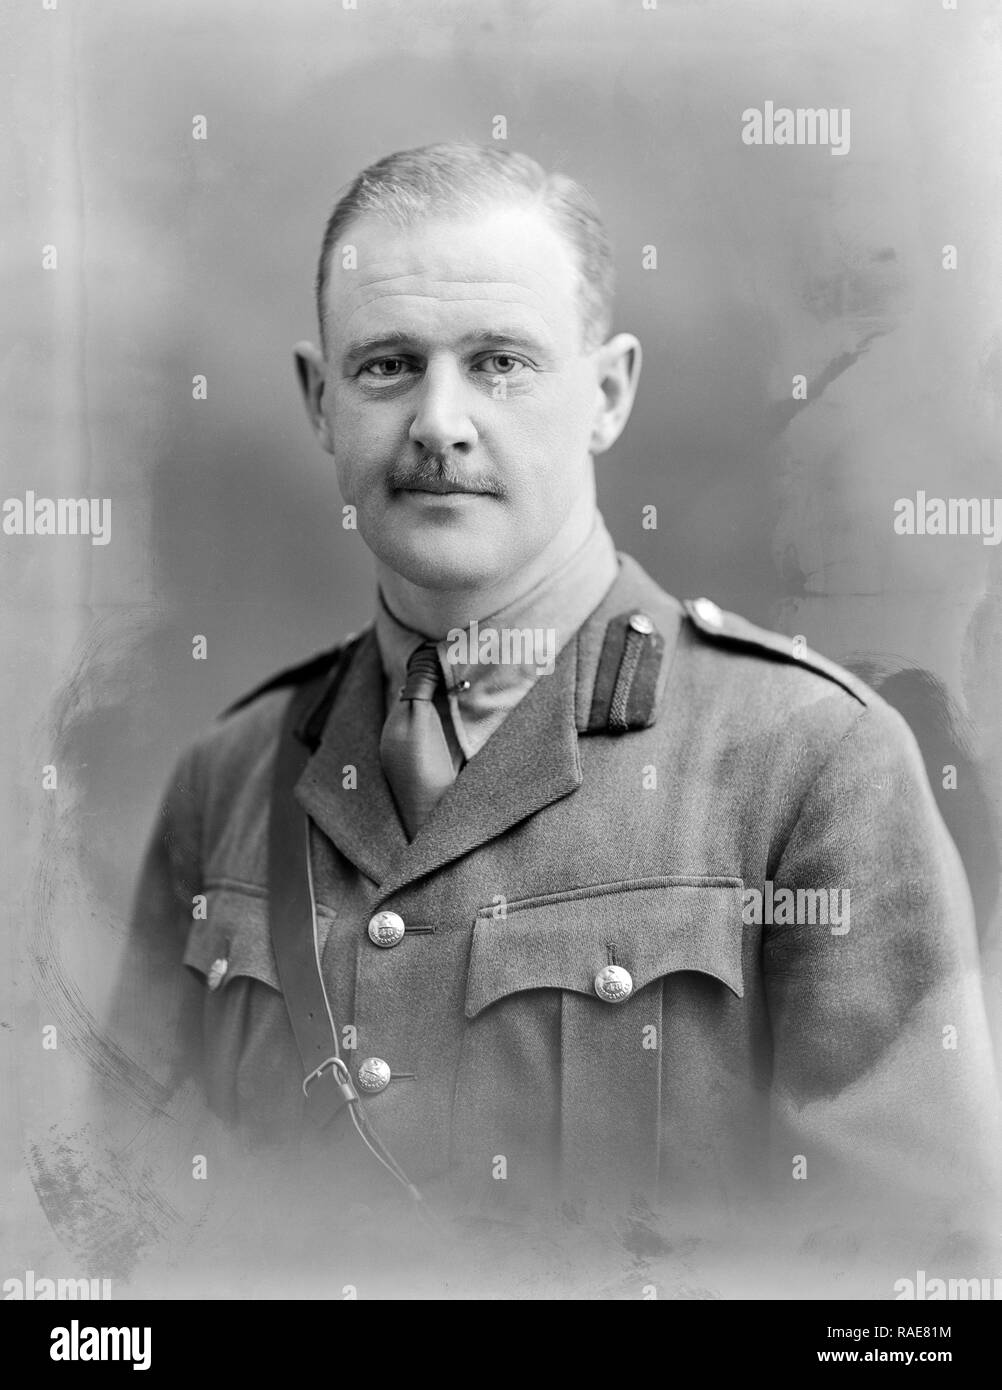 Photo taken on 11th January 1916. Captain Cockhrane of the 48th Highlanders of Canada. Studio portrait photograph taken at the famous Bassano Studios in London. Stock Photo